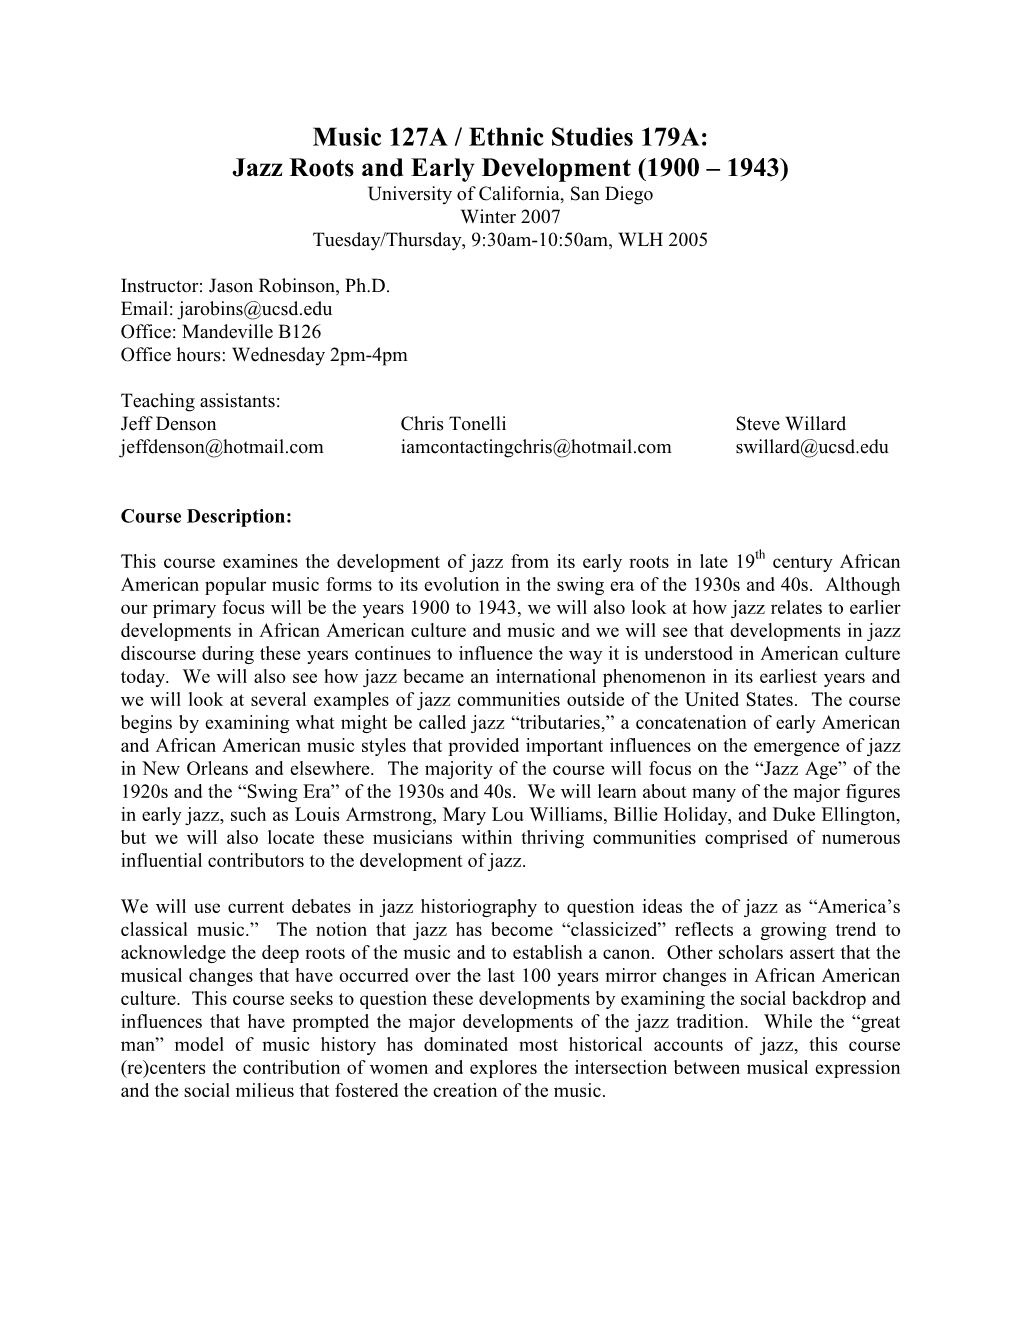 Music 127A / Ethnic Studies 179A: Jazz Roots and Early Development